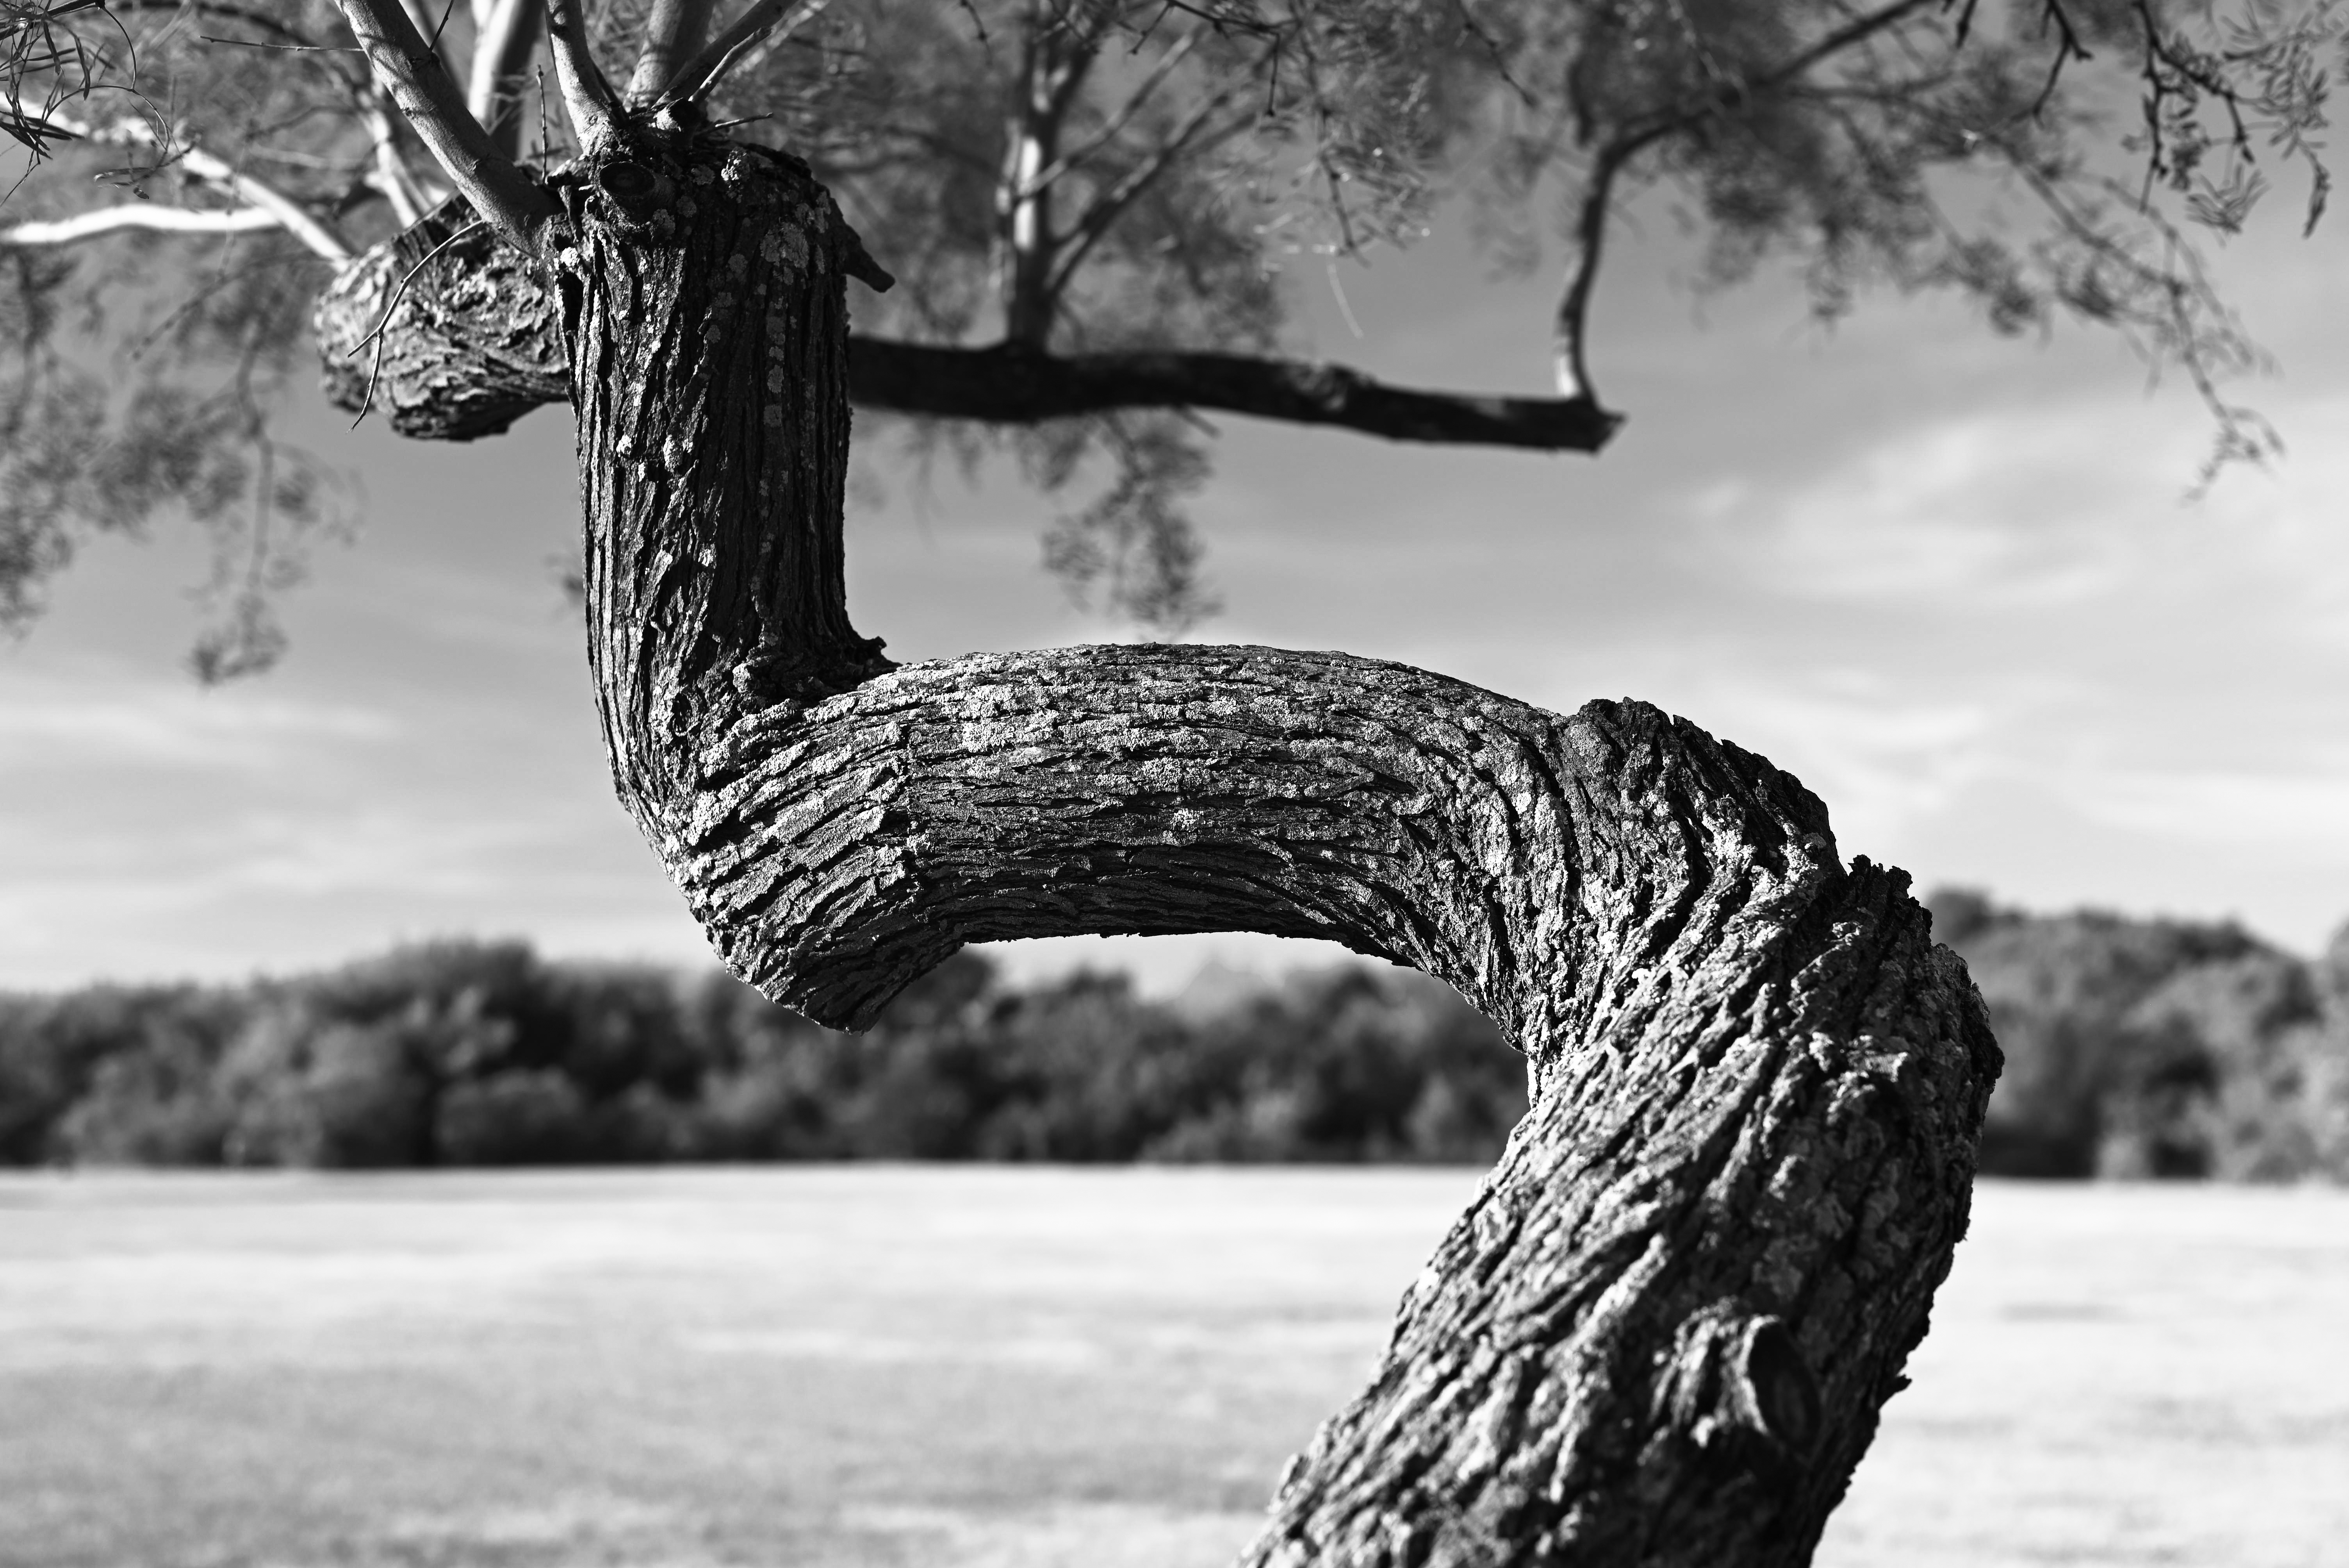 General 6016x4016 nature tree bark monochrome outdoors landscape contrast photography trees depth of field